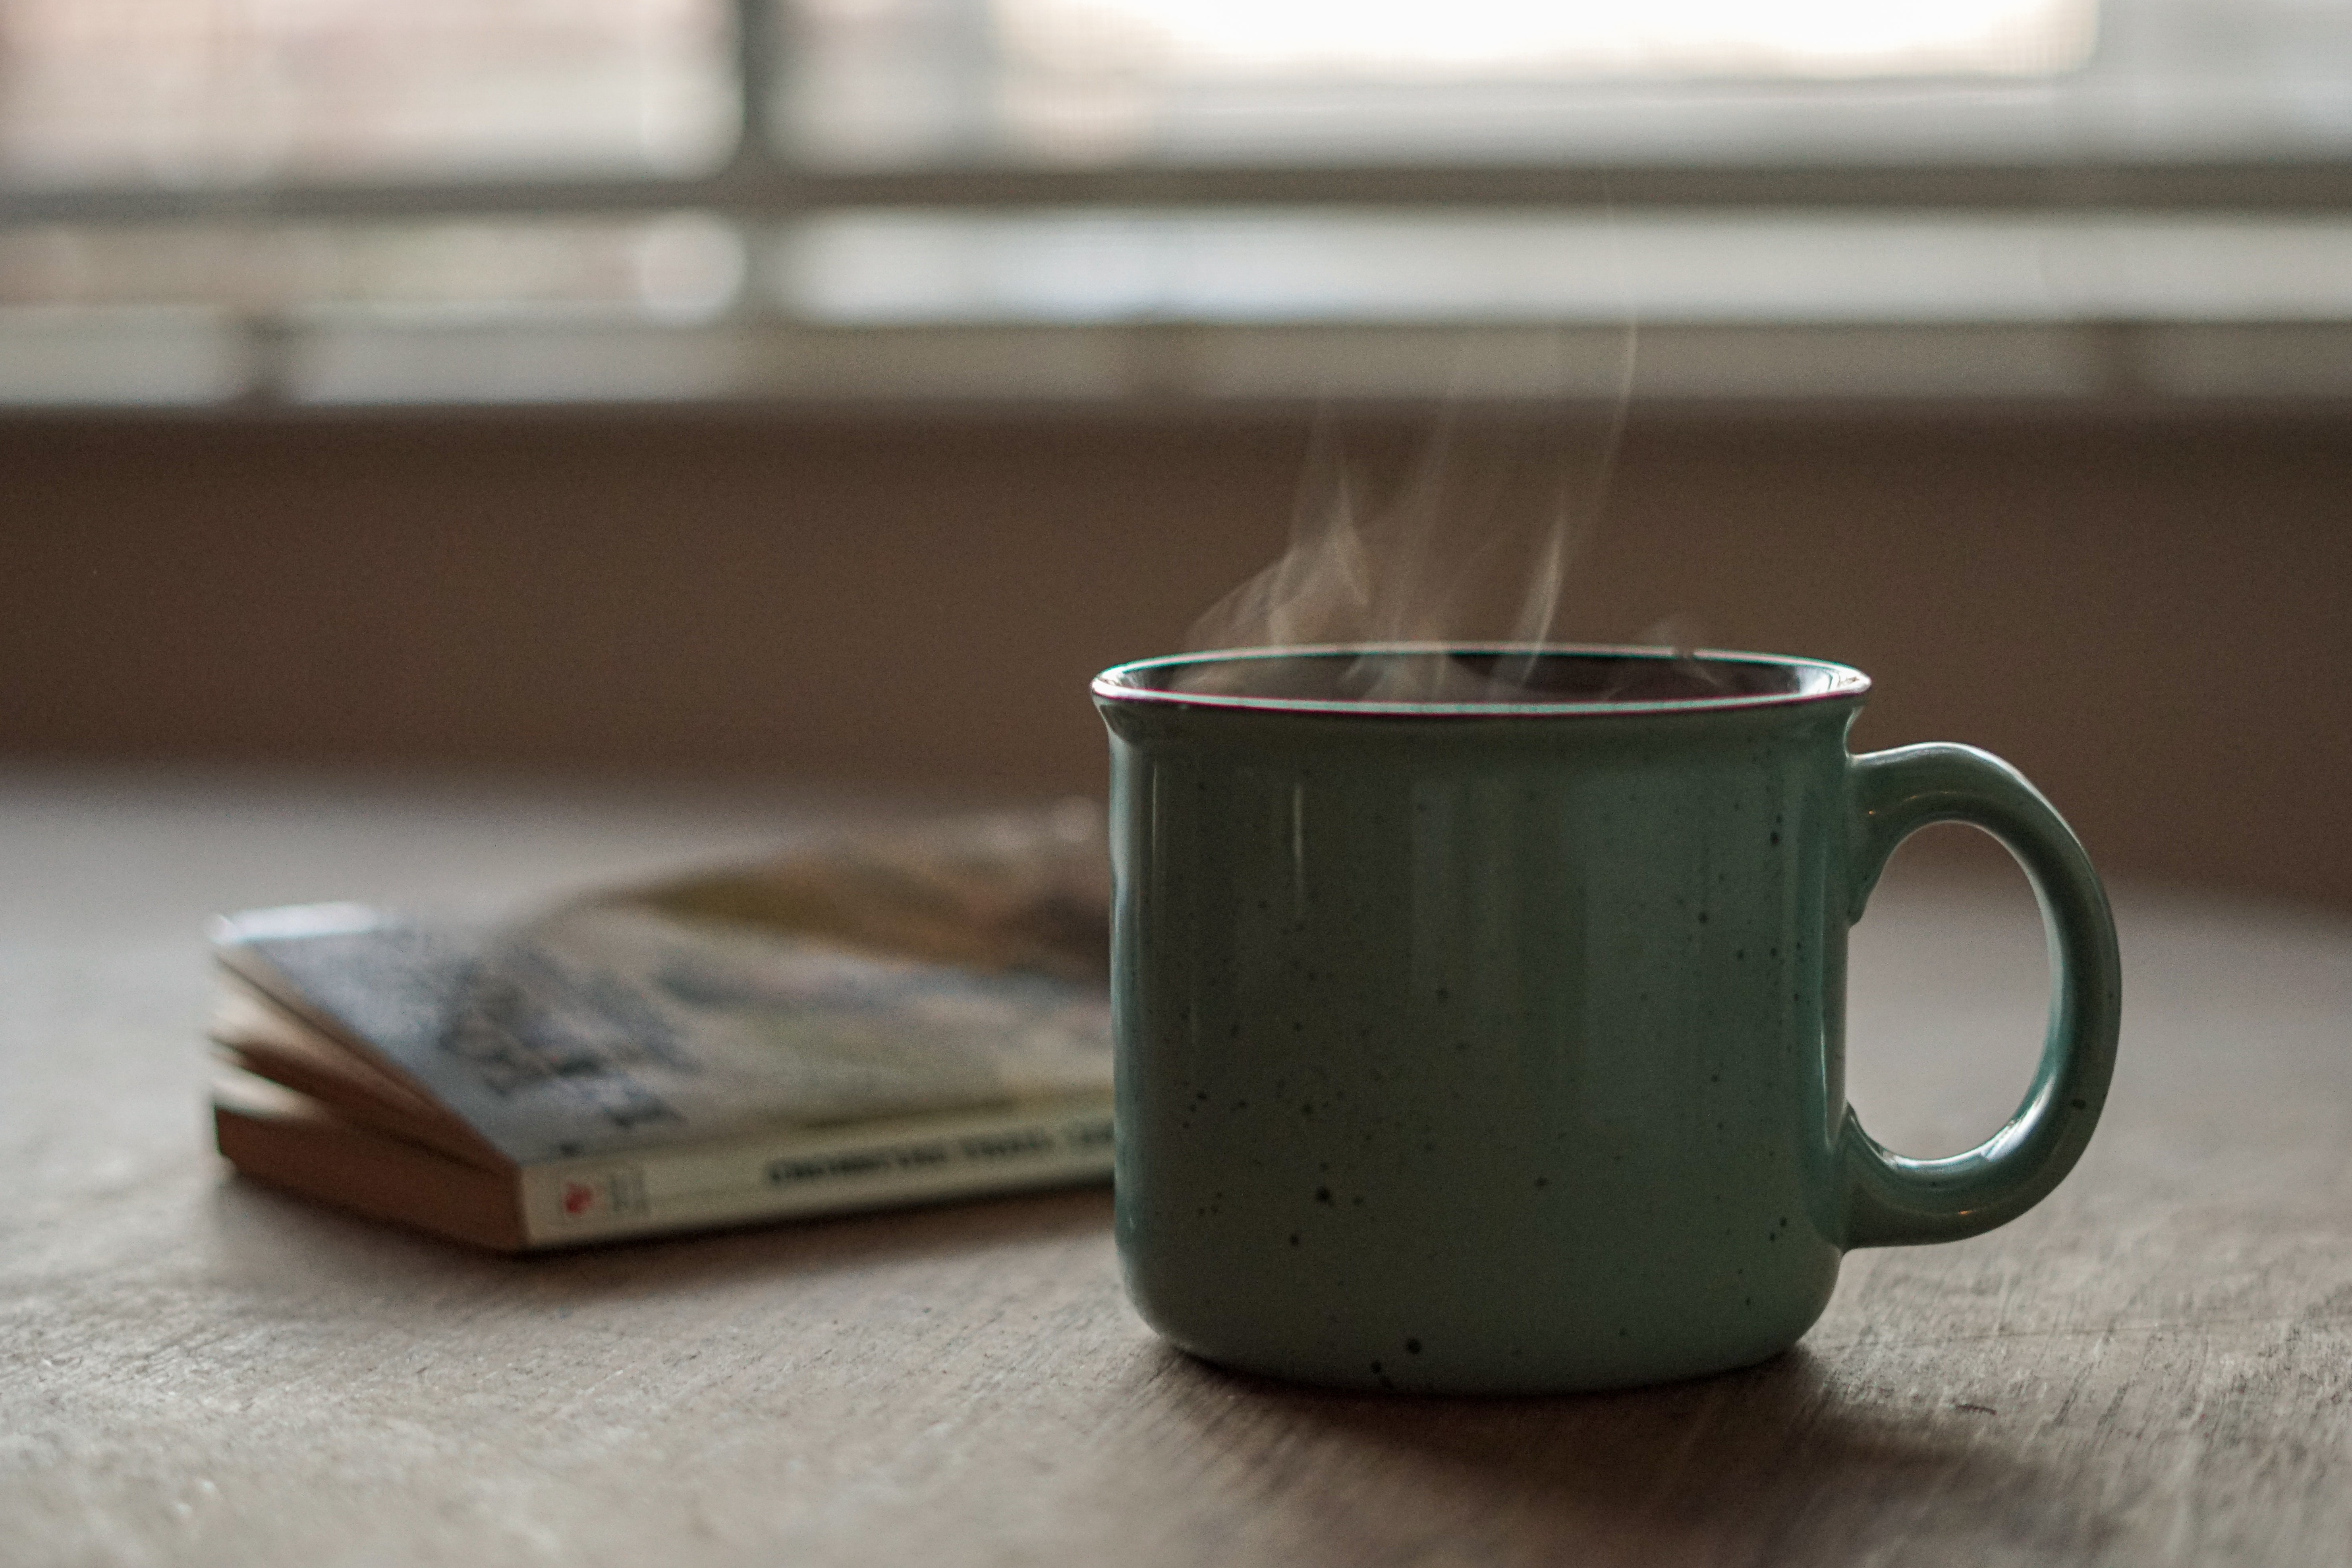 cup of tea or coffee by a book